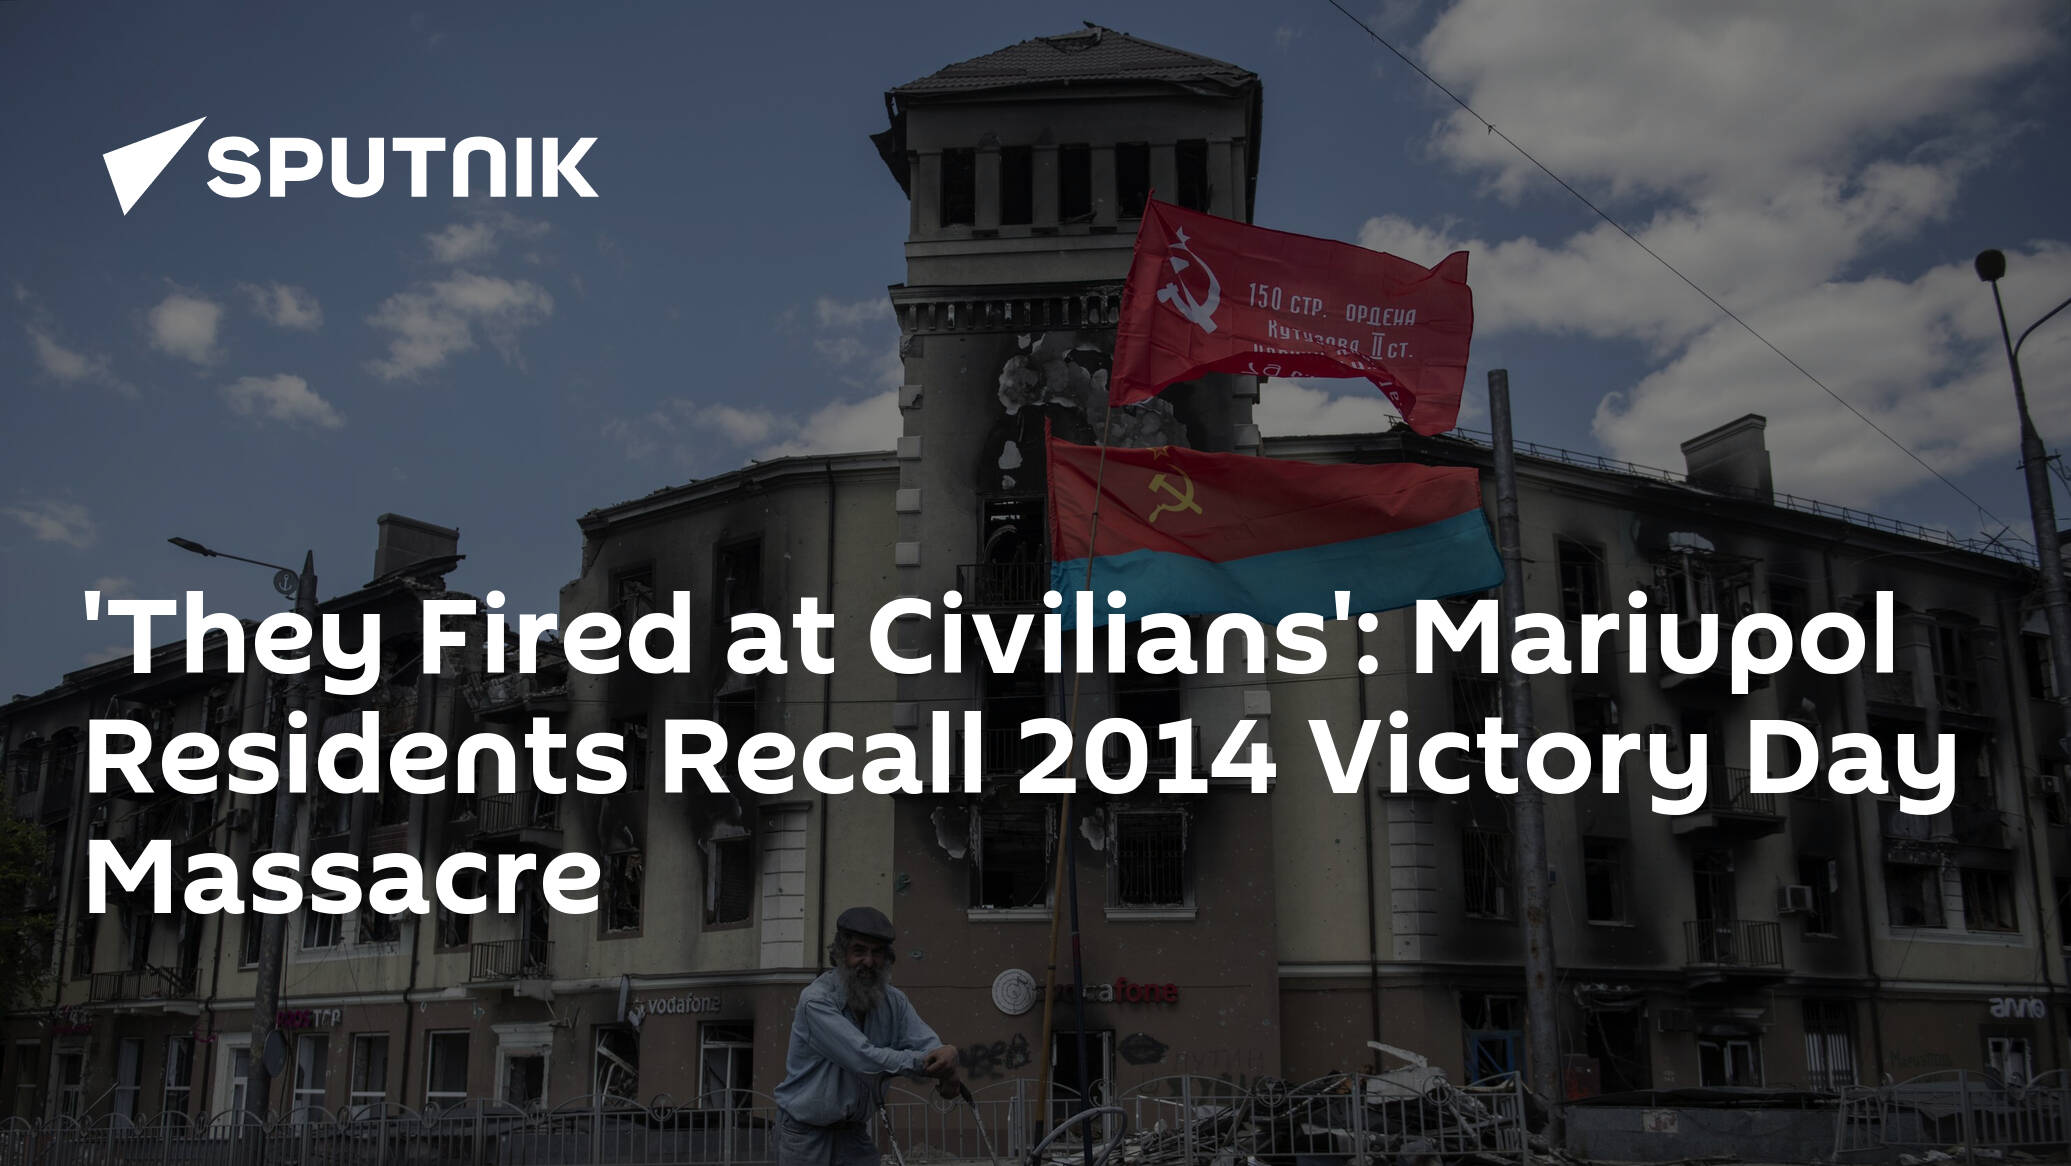 'They Fired at Civilians': Mariupol Residents Recall 2014 Victory Day Massacre